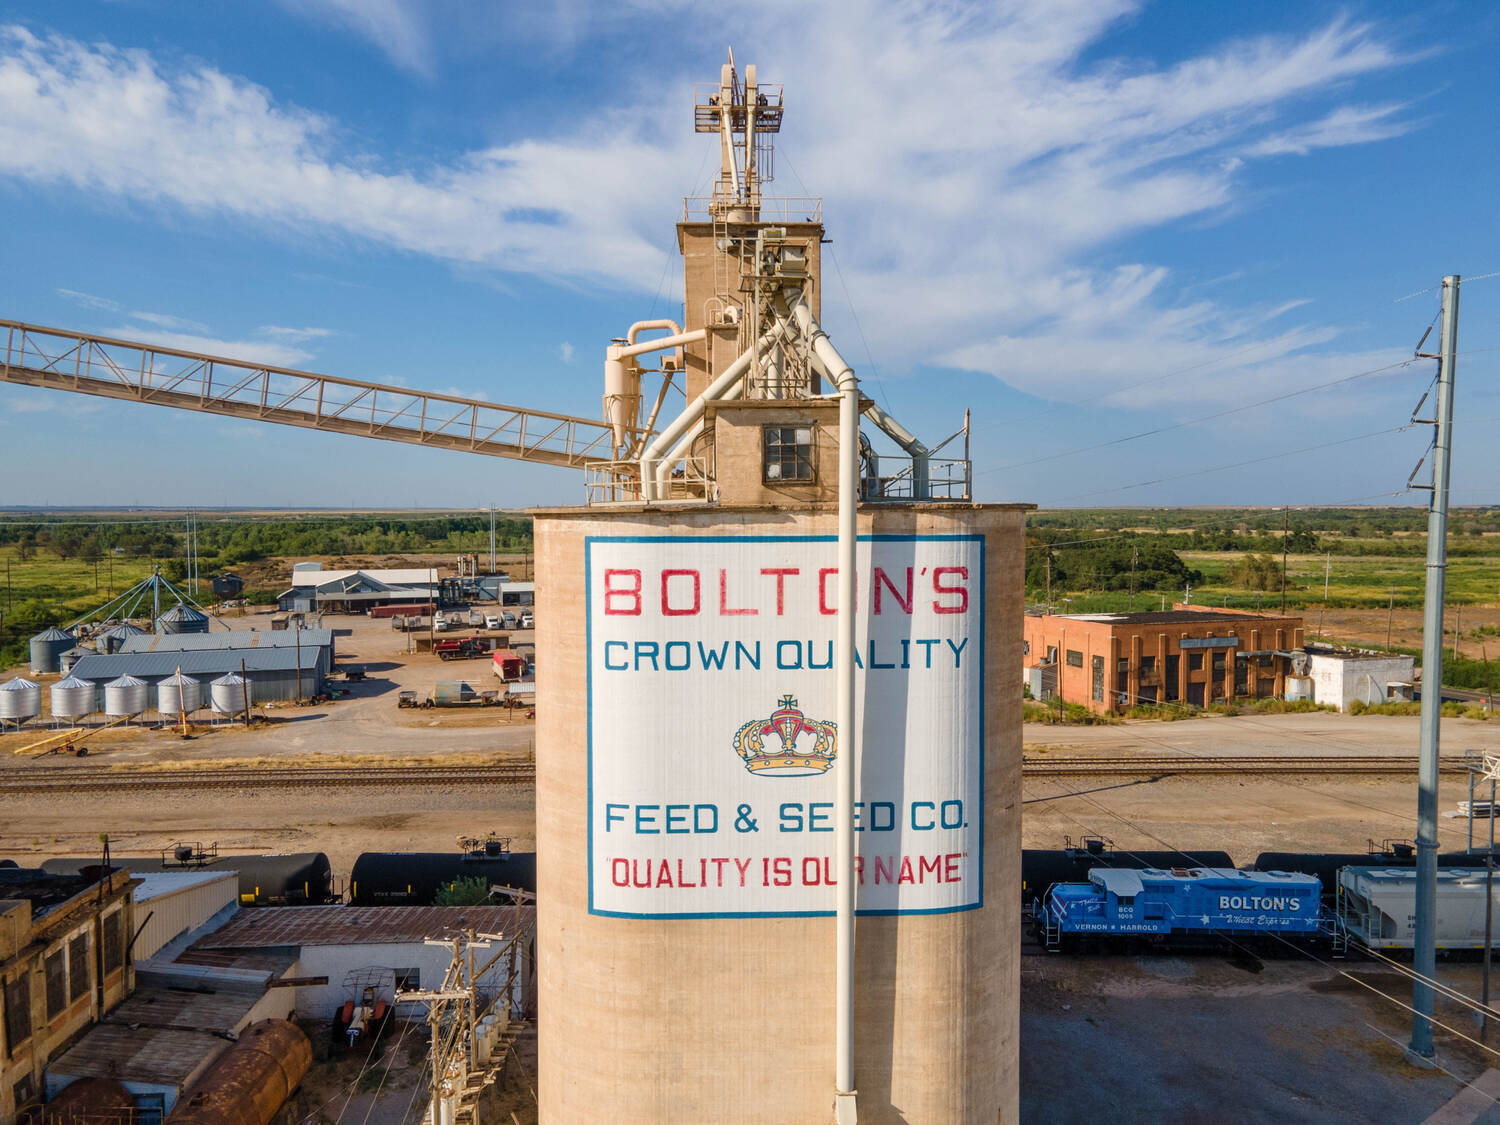 Boltons-Crown-Quality-Feed-Grain-Elevator-Vernon-TX-Wilbarger-County-Republic-Ranches-Bryan-Pickens-13-of-25